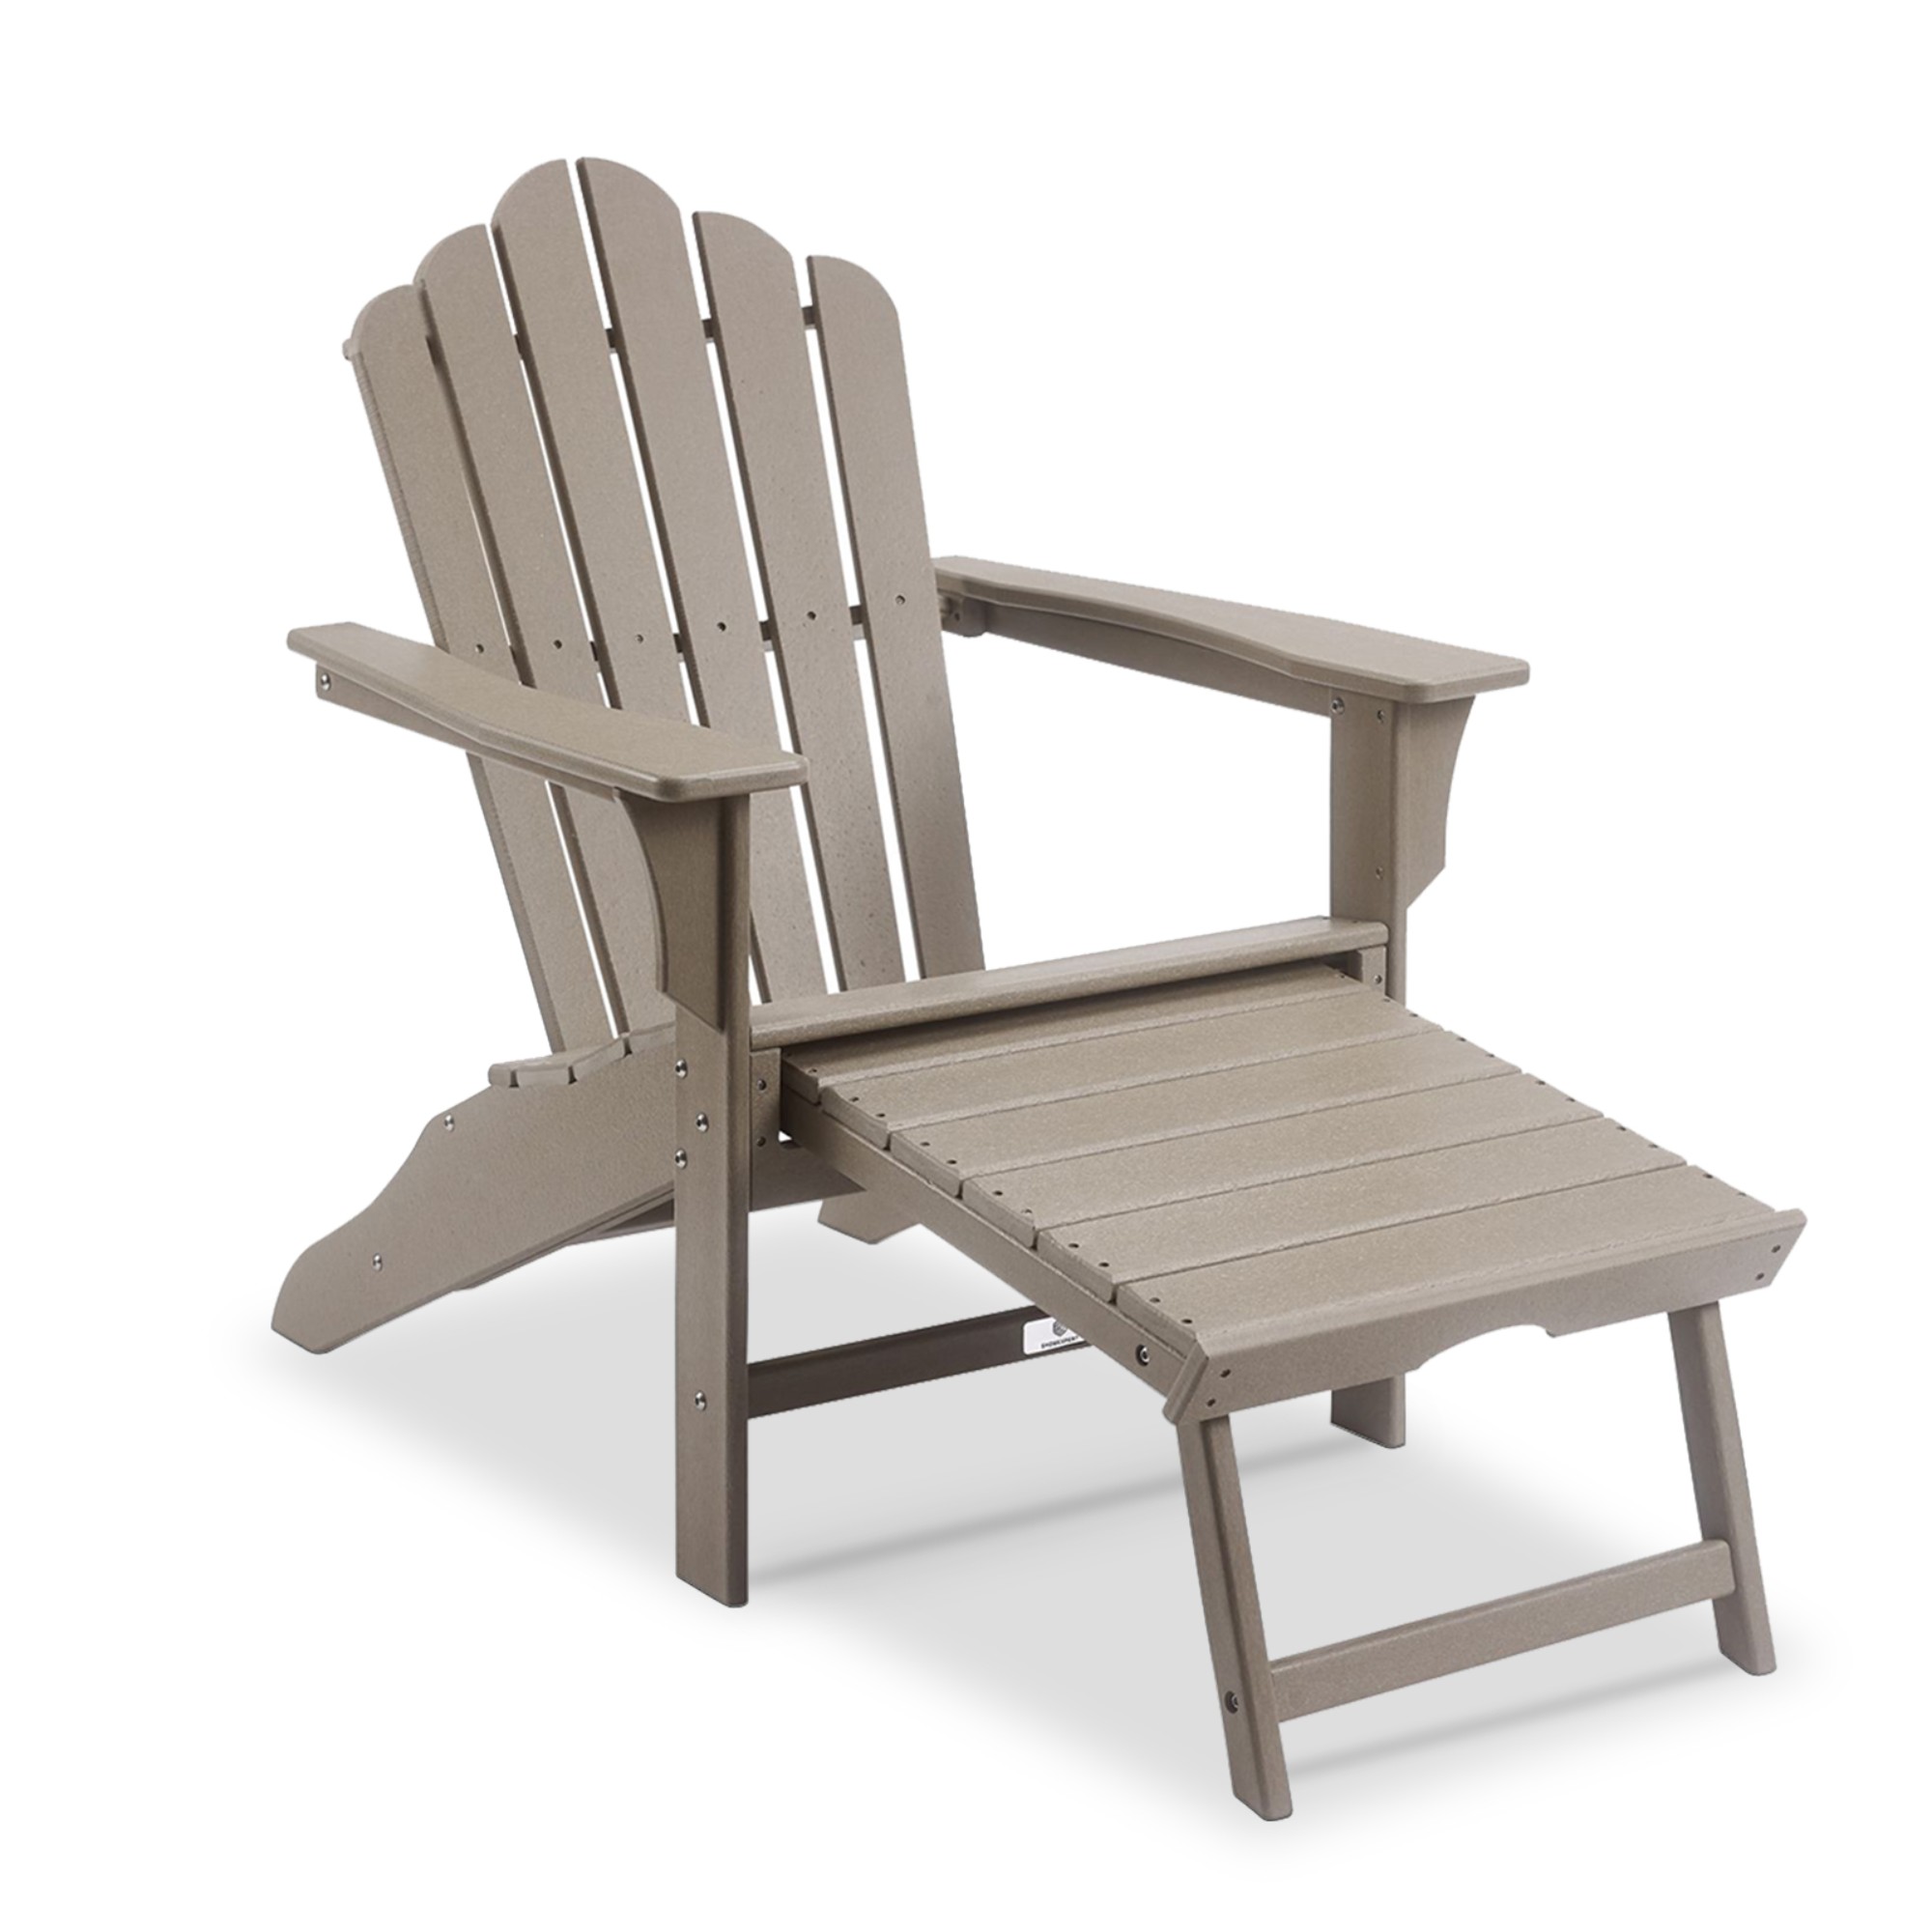 HDPE Classic Outdoor Adirondack Chair With Footrest, Weather Resistant Accent Furniture